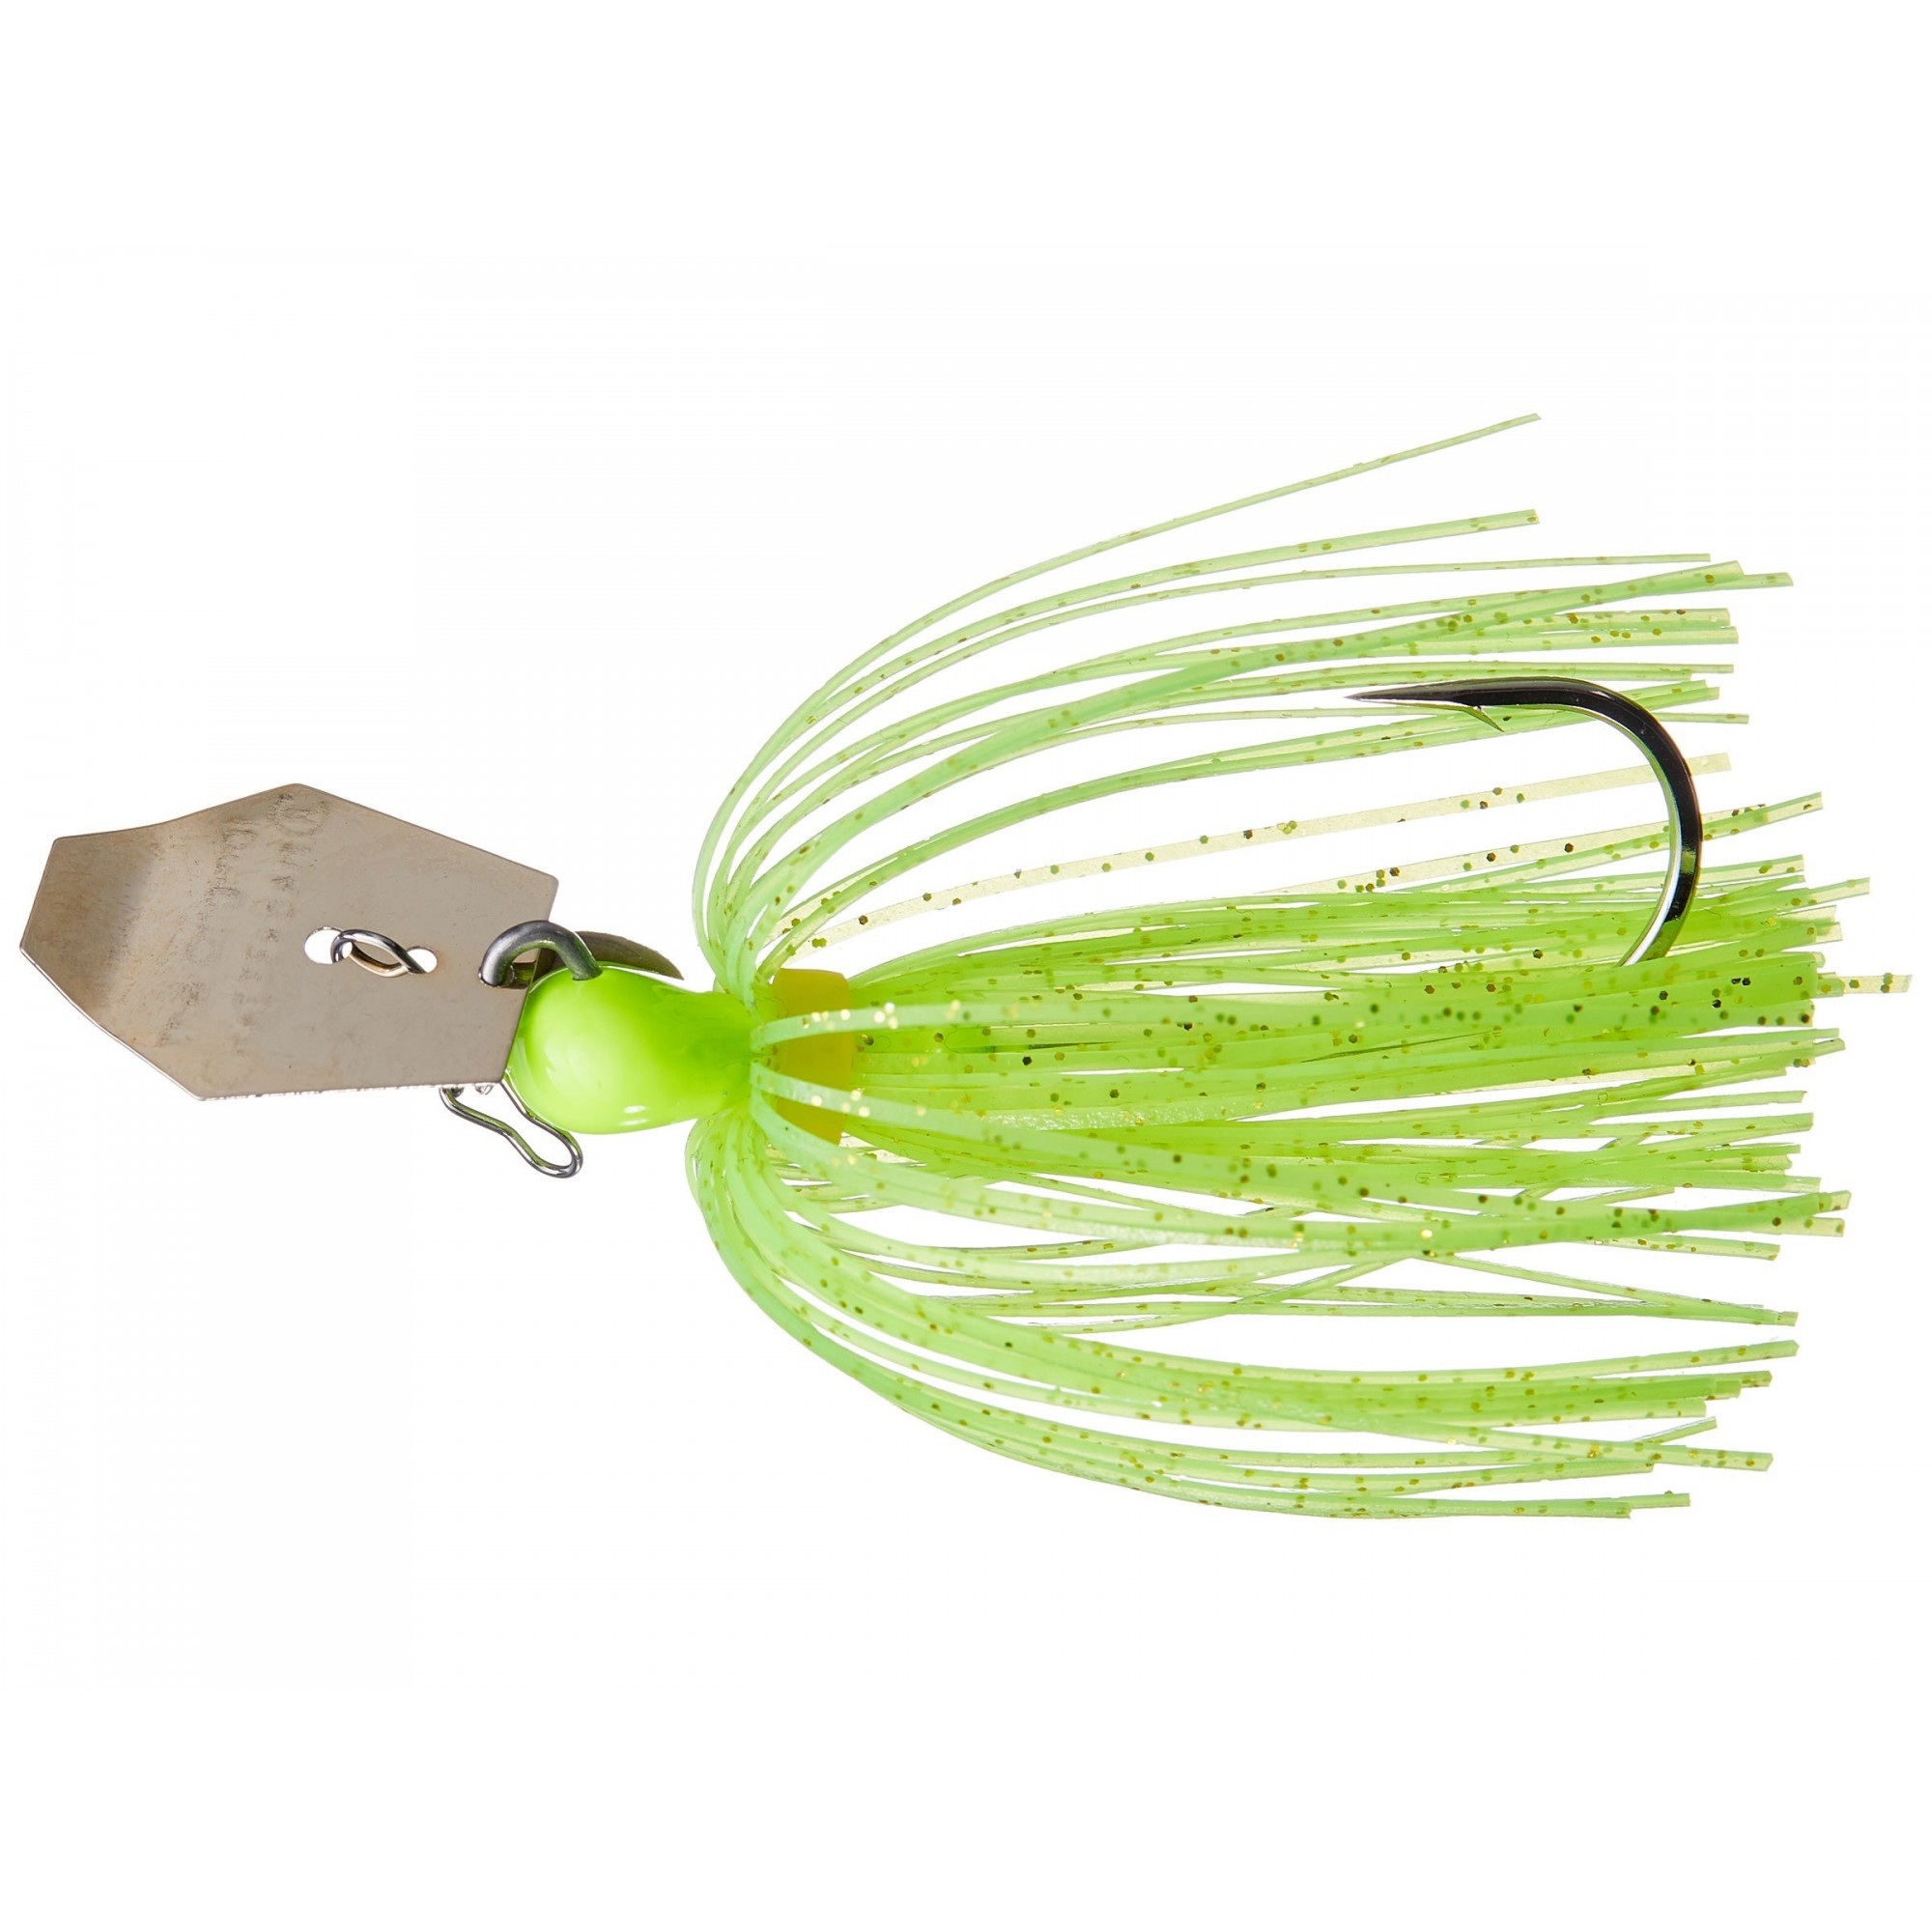 Esche-metalliche-chatterbait-chatter-bladed-jig-z-man-chatterbait-mini-03-chartreuse-lure-fishing-planet.